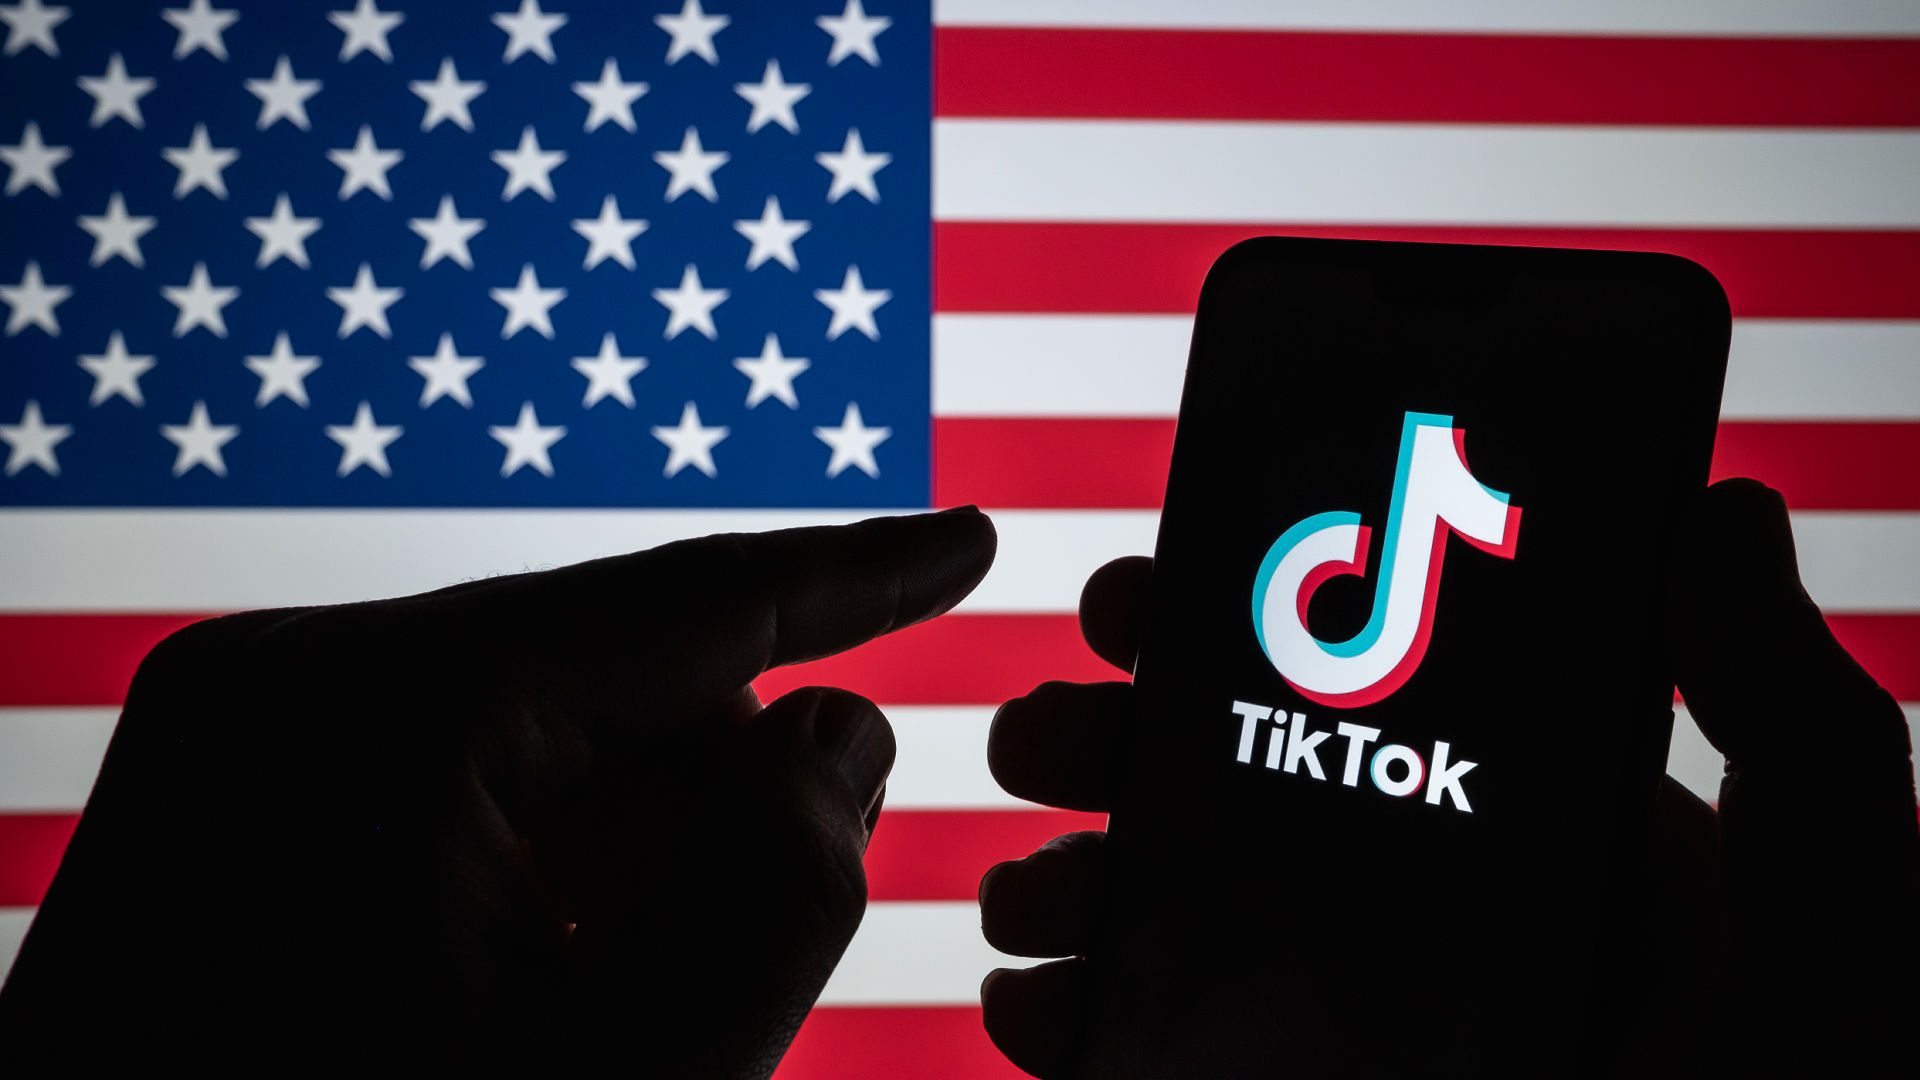 US lawmakers to include ban on TikTok on government devices – sources featured image